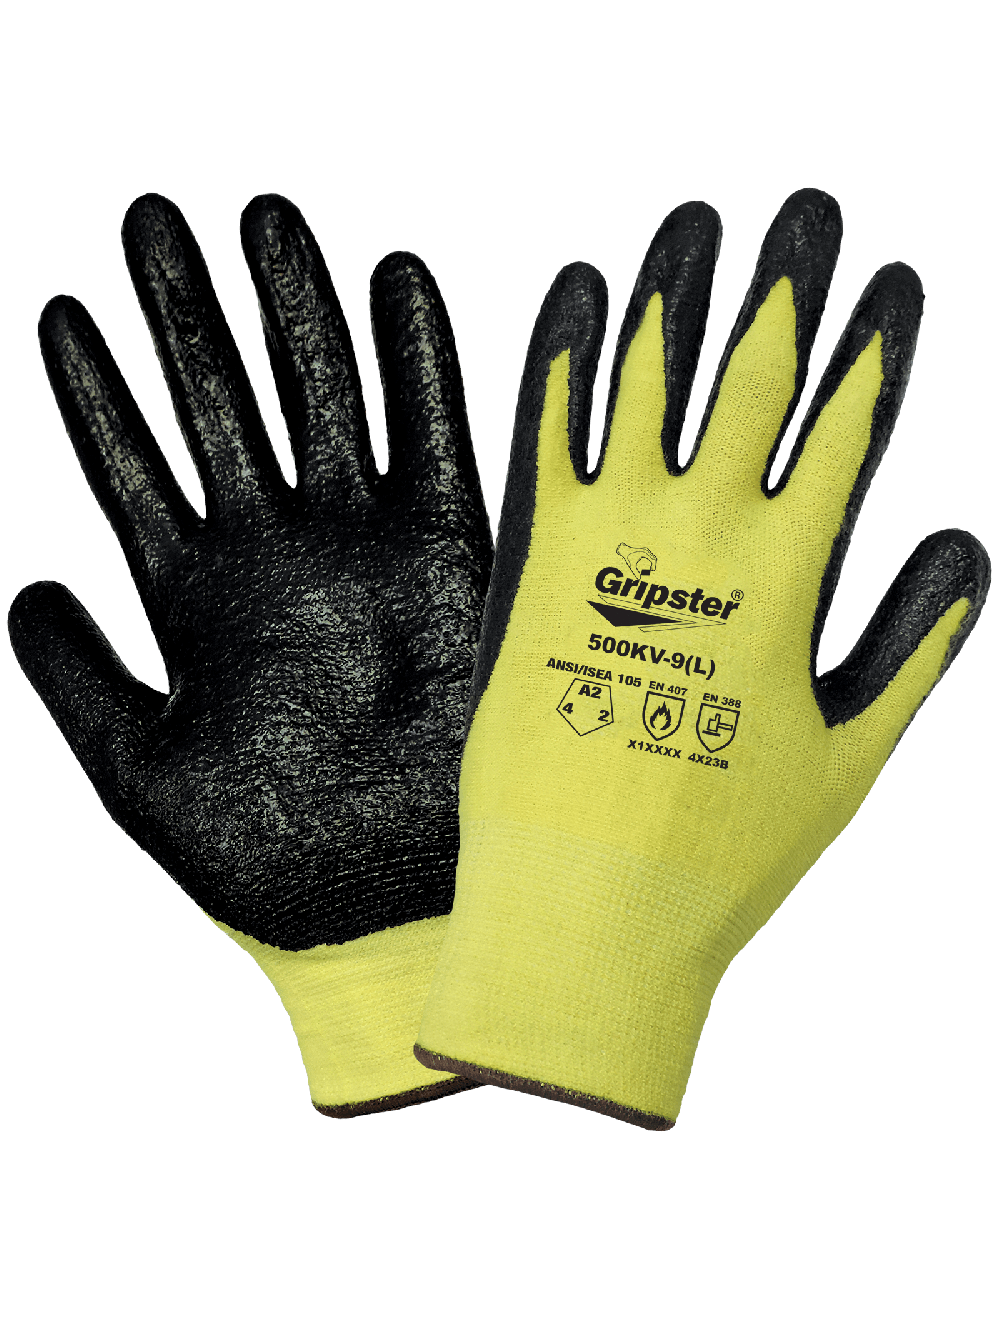 Global Glove Vise Gripster C.I.A. Cut-Resistant Gloves CIA609MFV-9